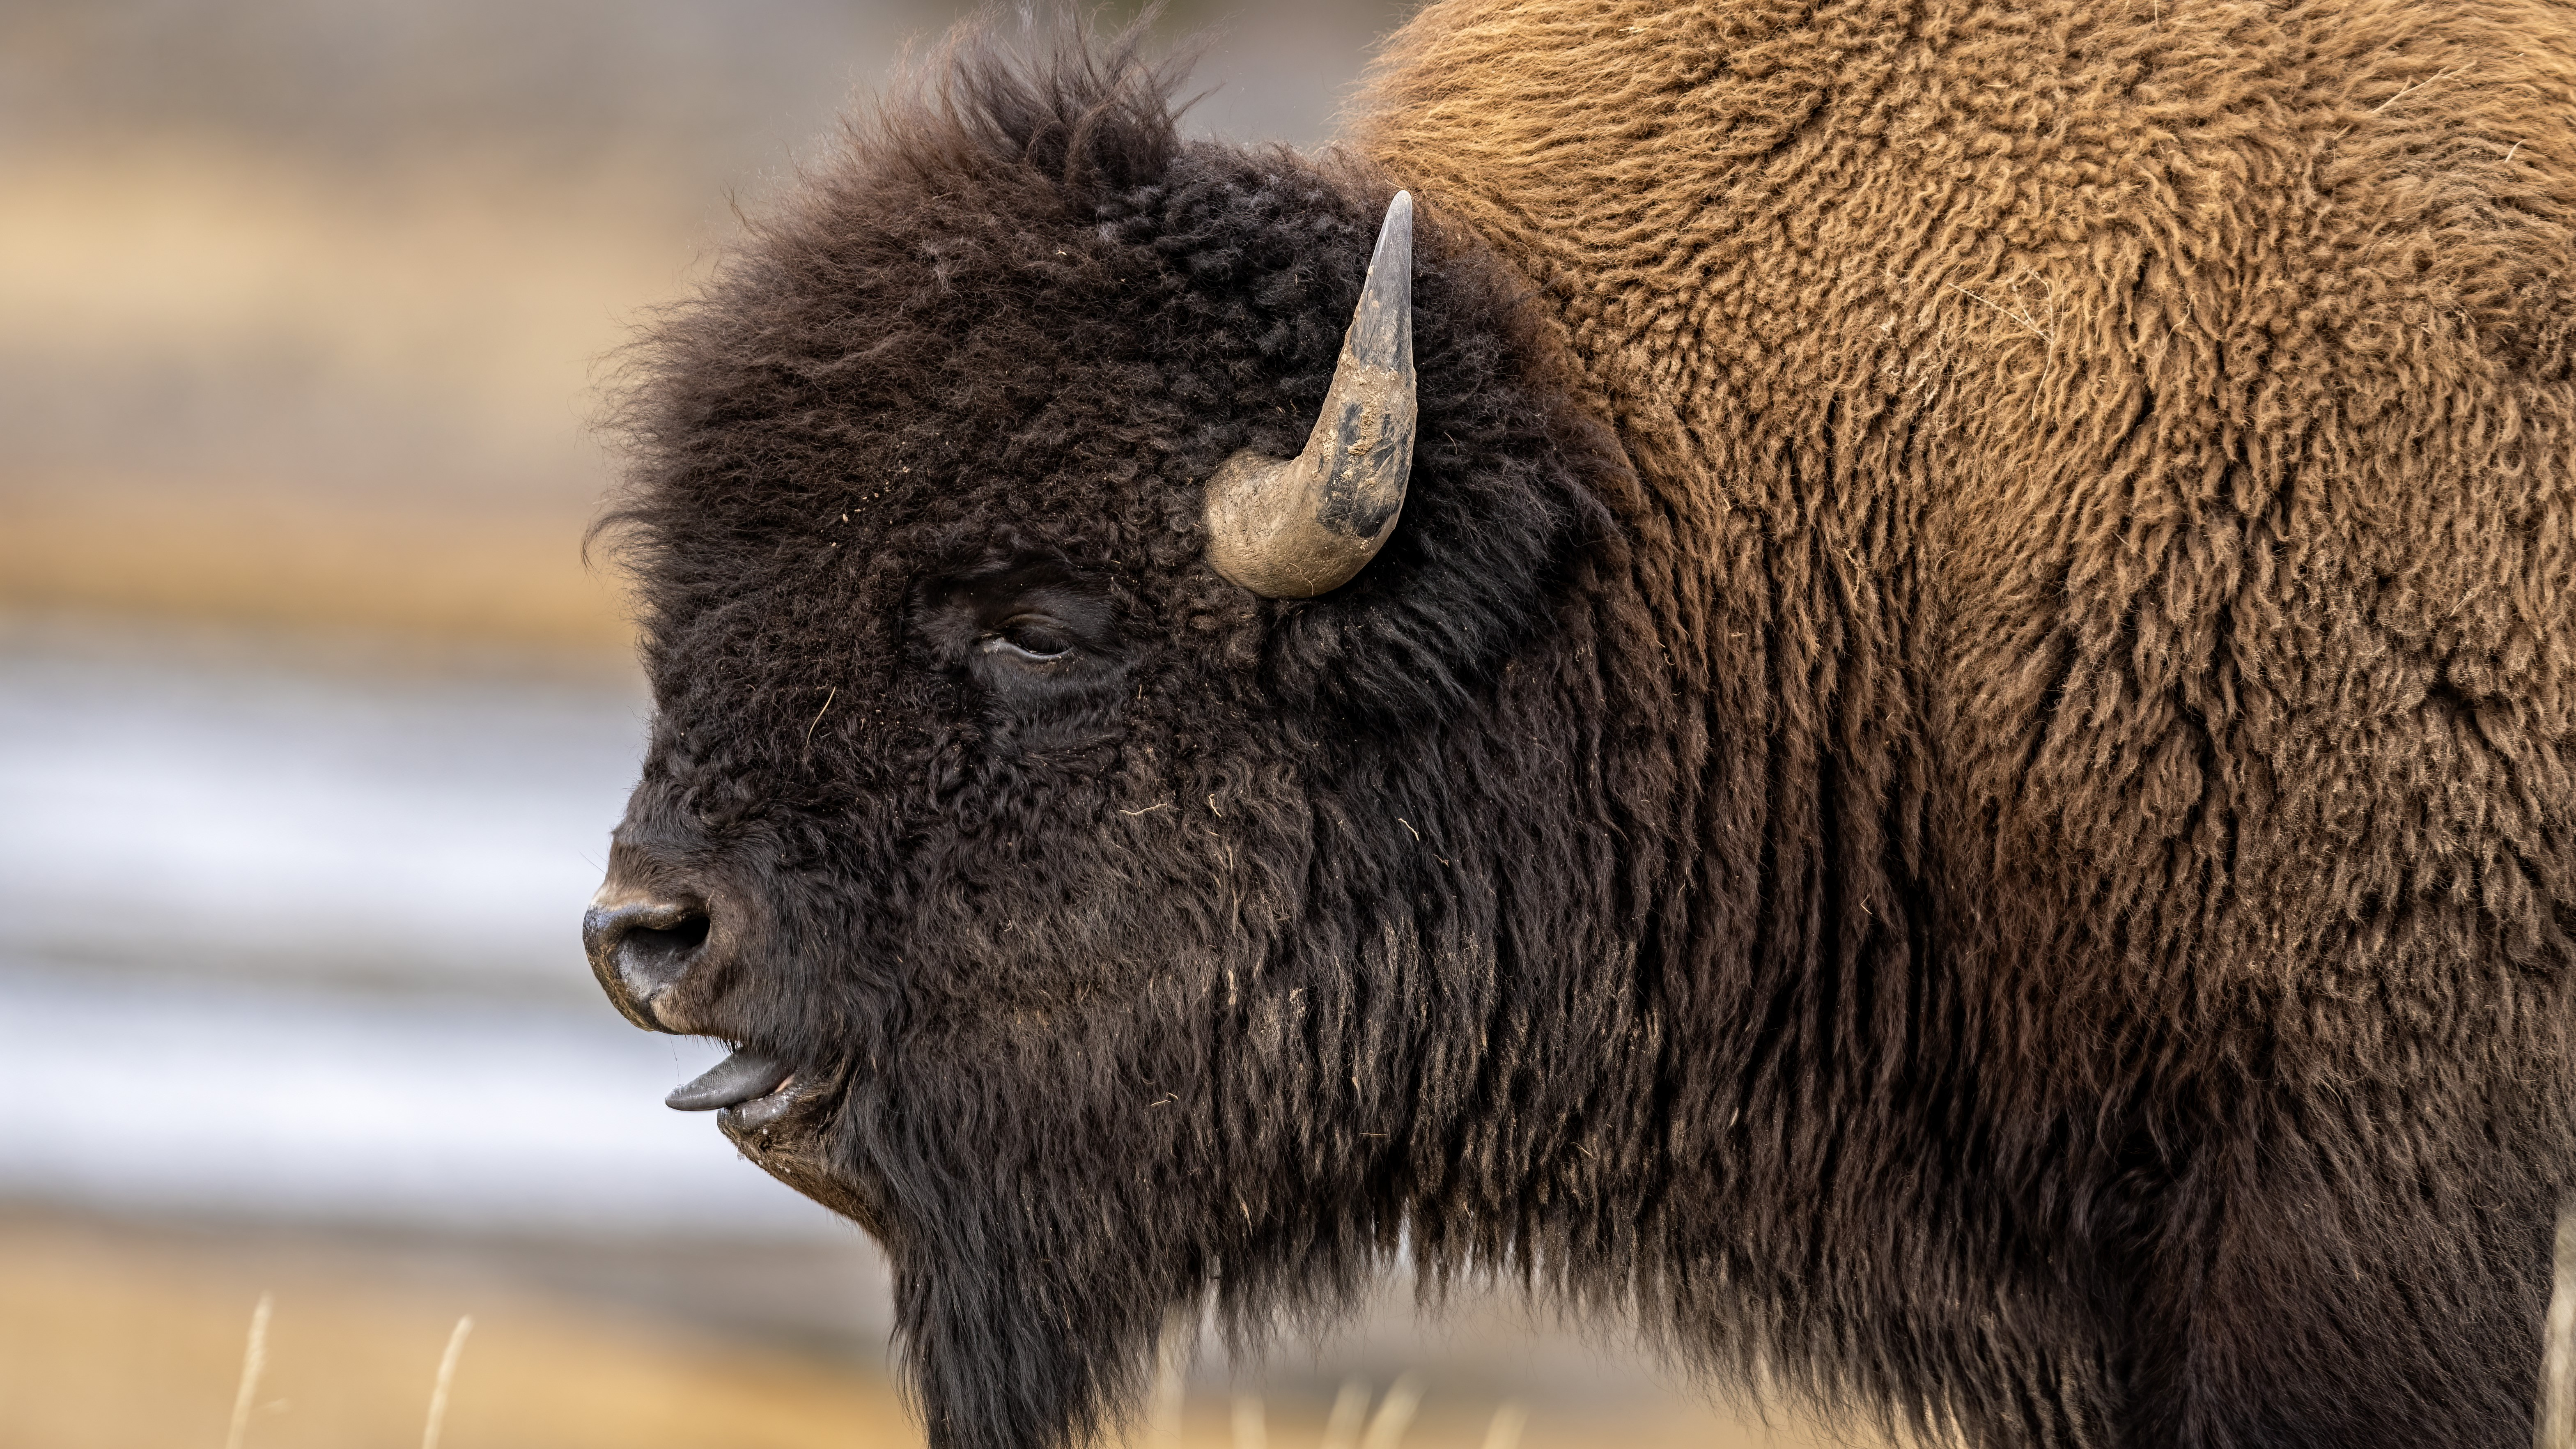 Yellowstone hiker ignores warnings to take selfies with massive bison on boardwalk